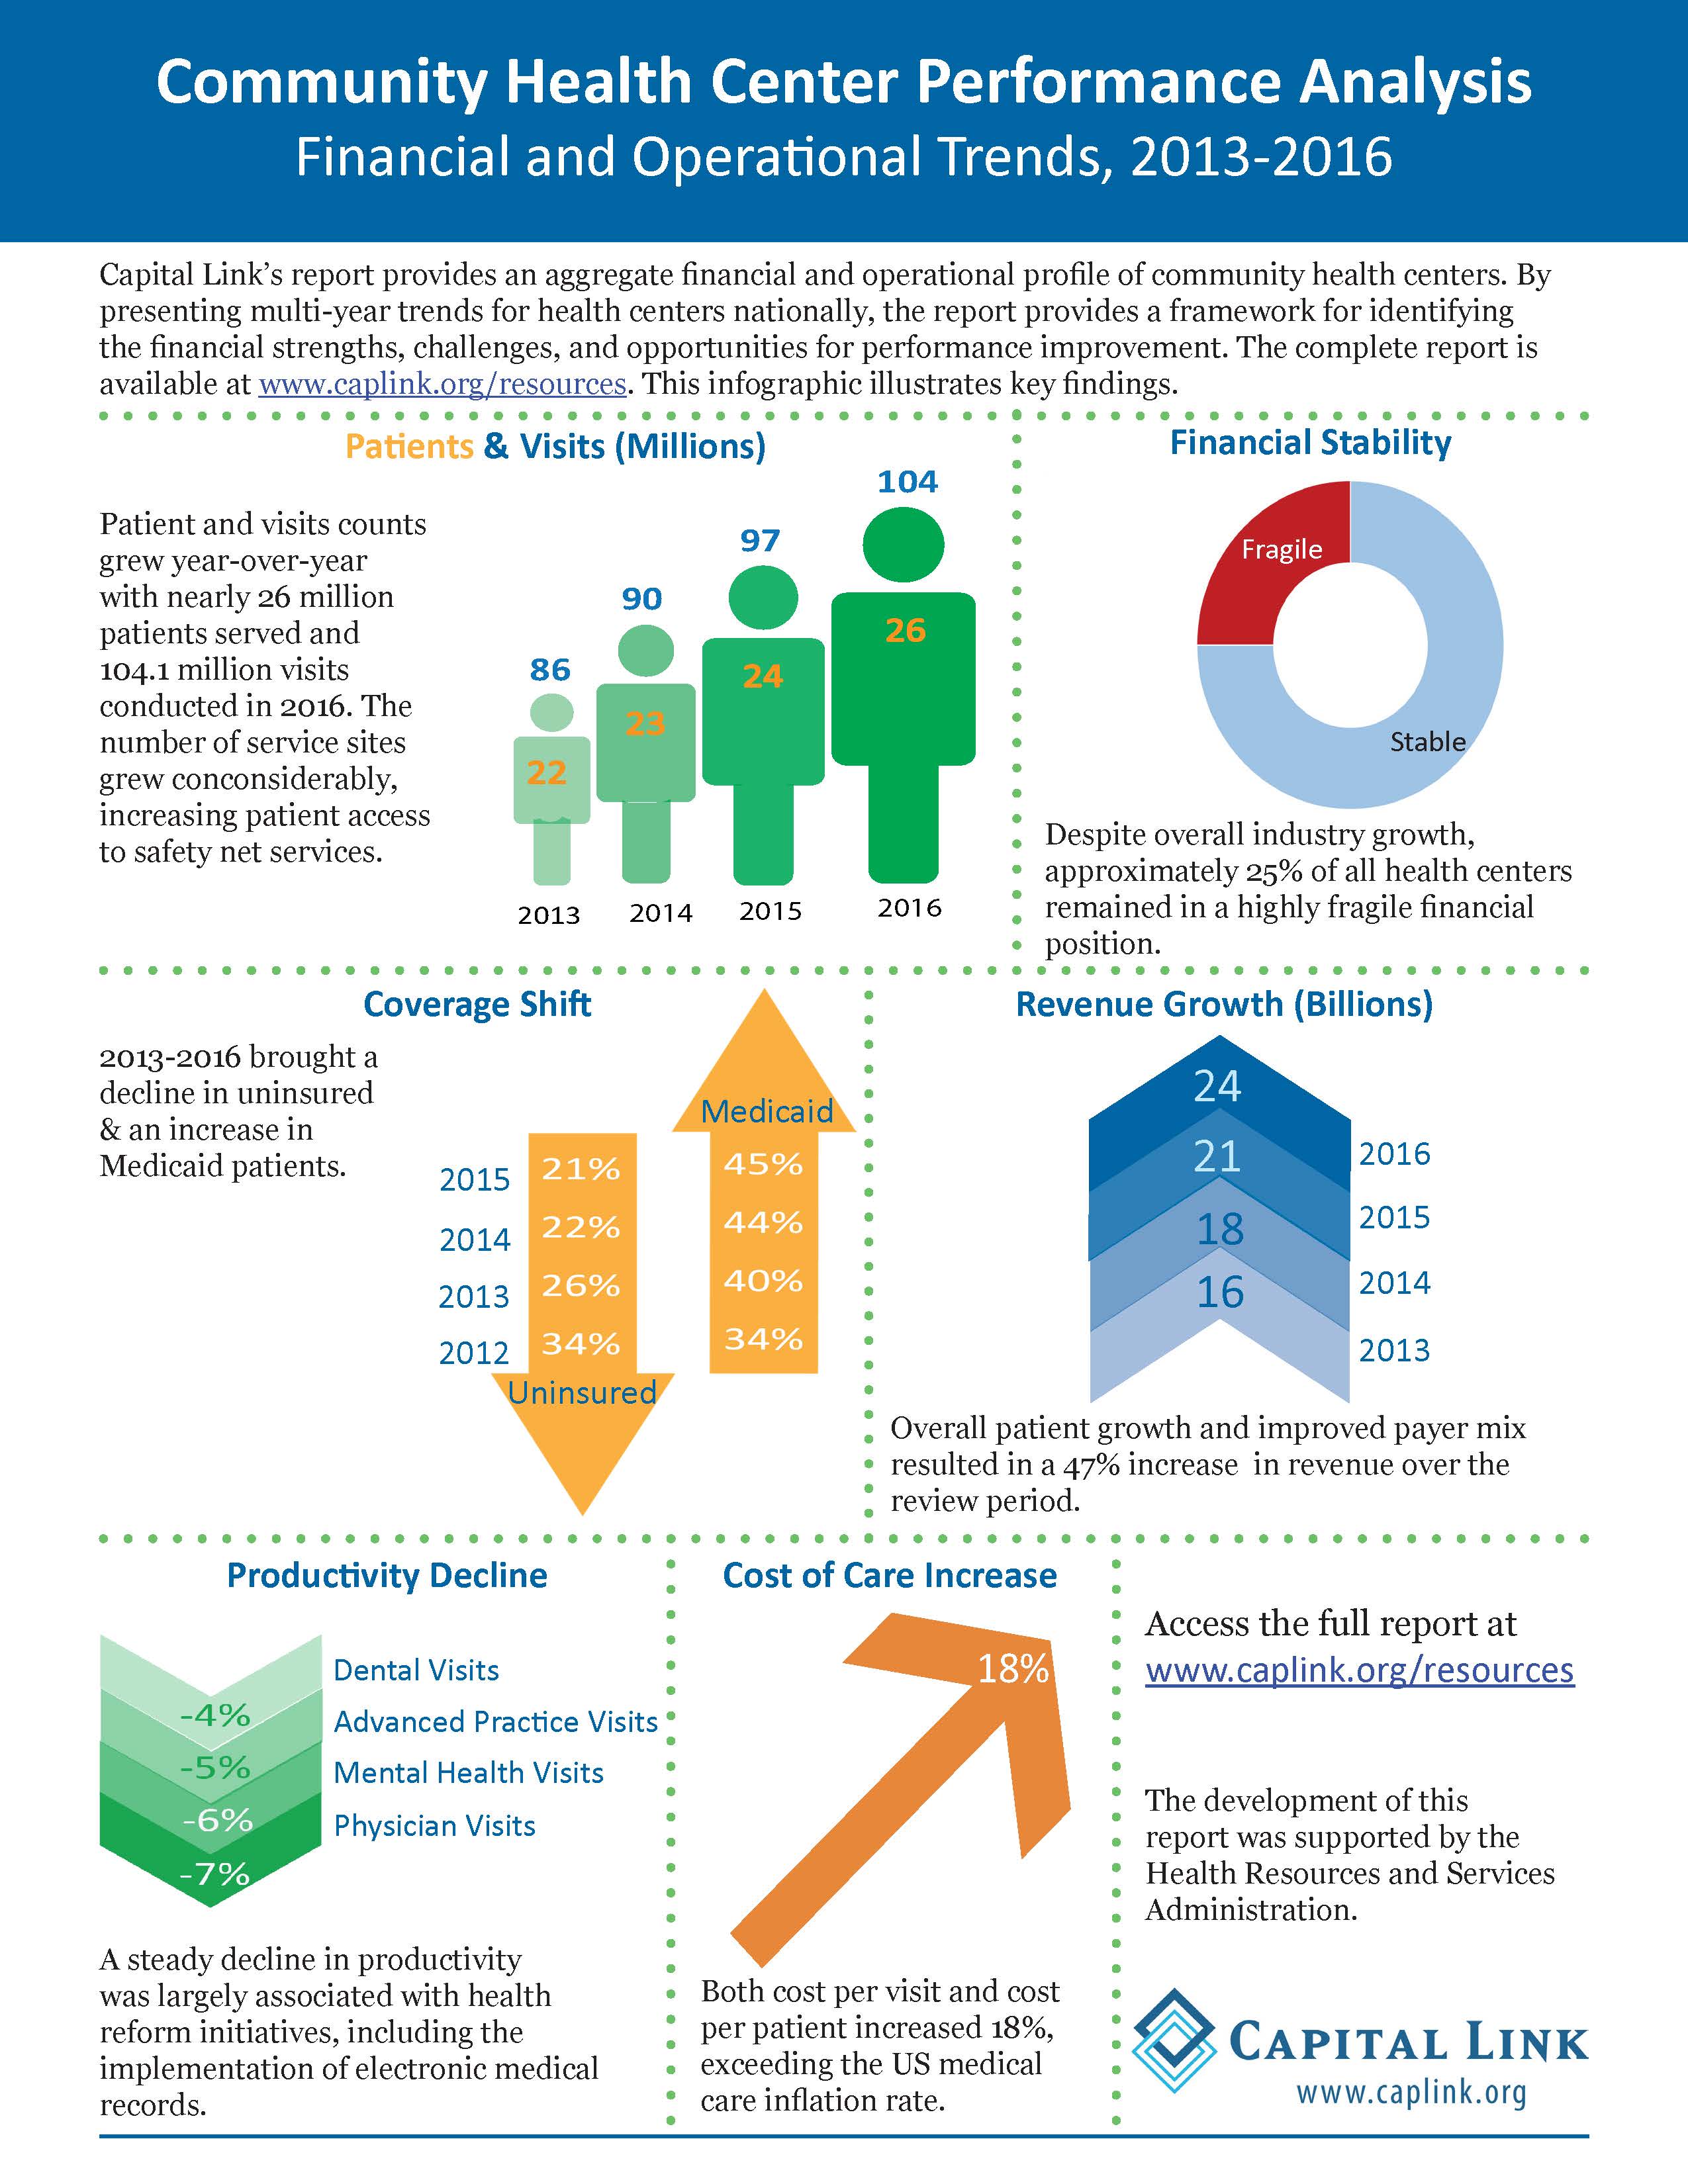 National Financial and Operational Trends 2013 2016 Infographic